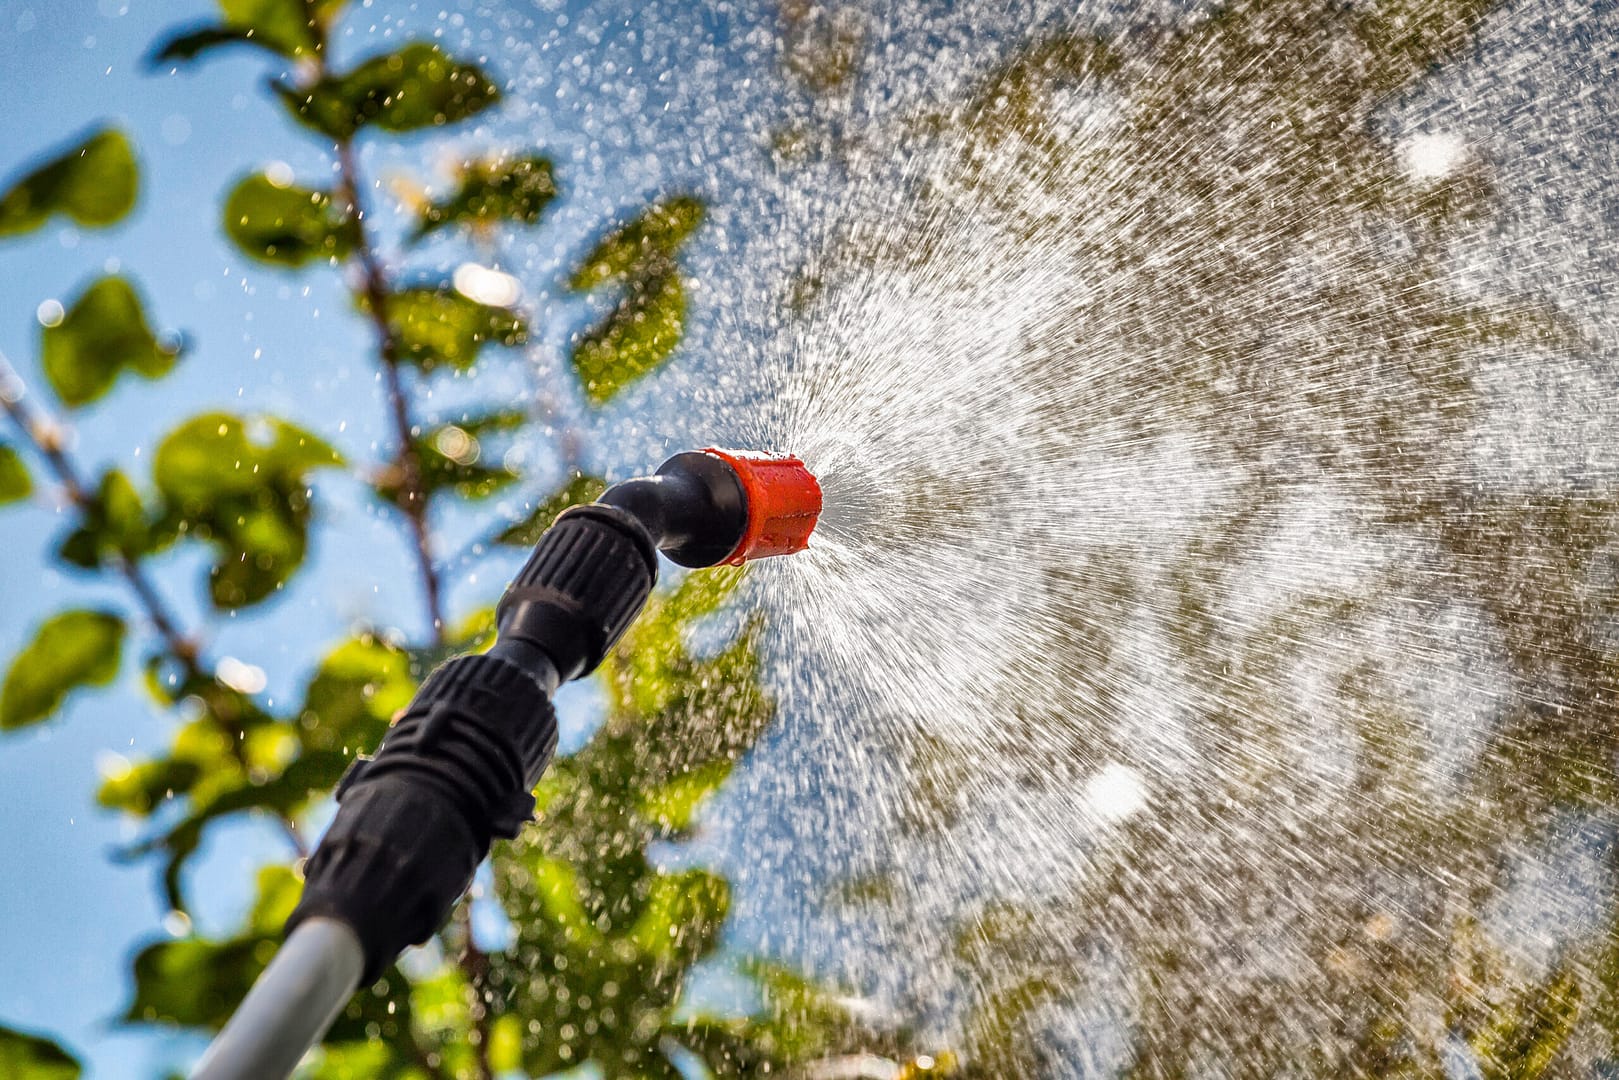 Using a sprayer to apply pest control chemicals on the leaves of trees to protect them from pests and diseases.